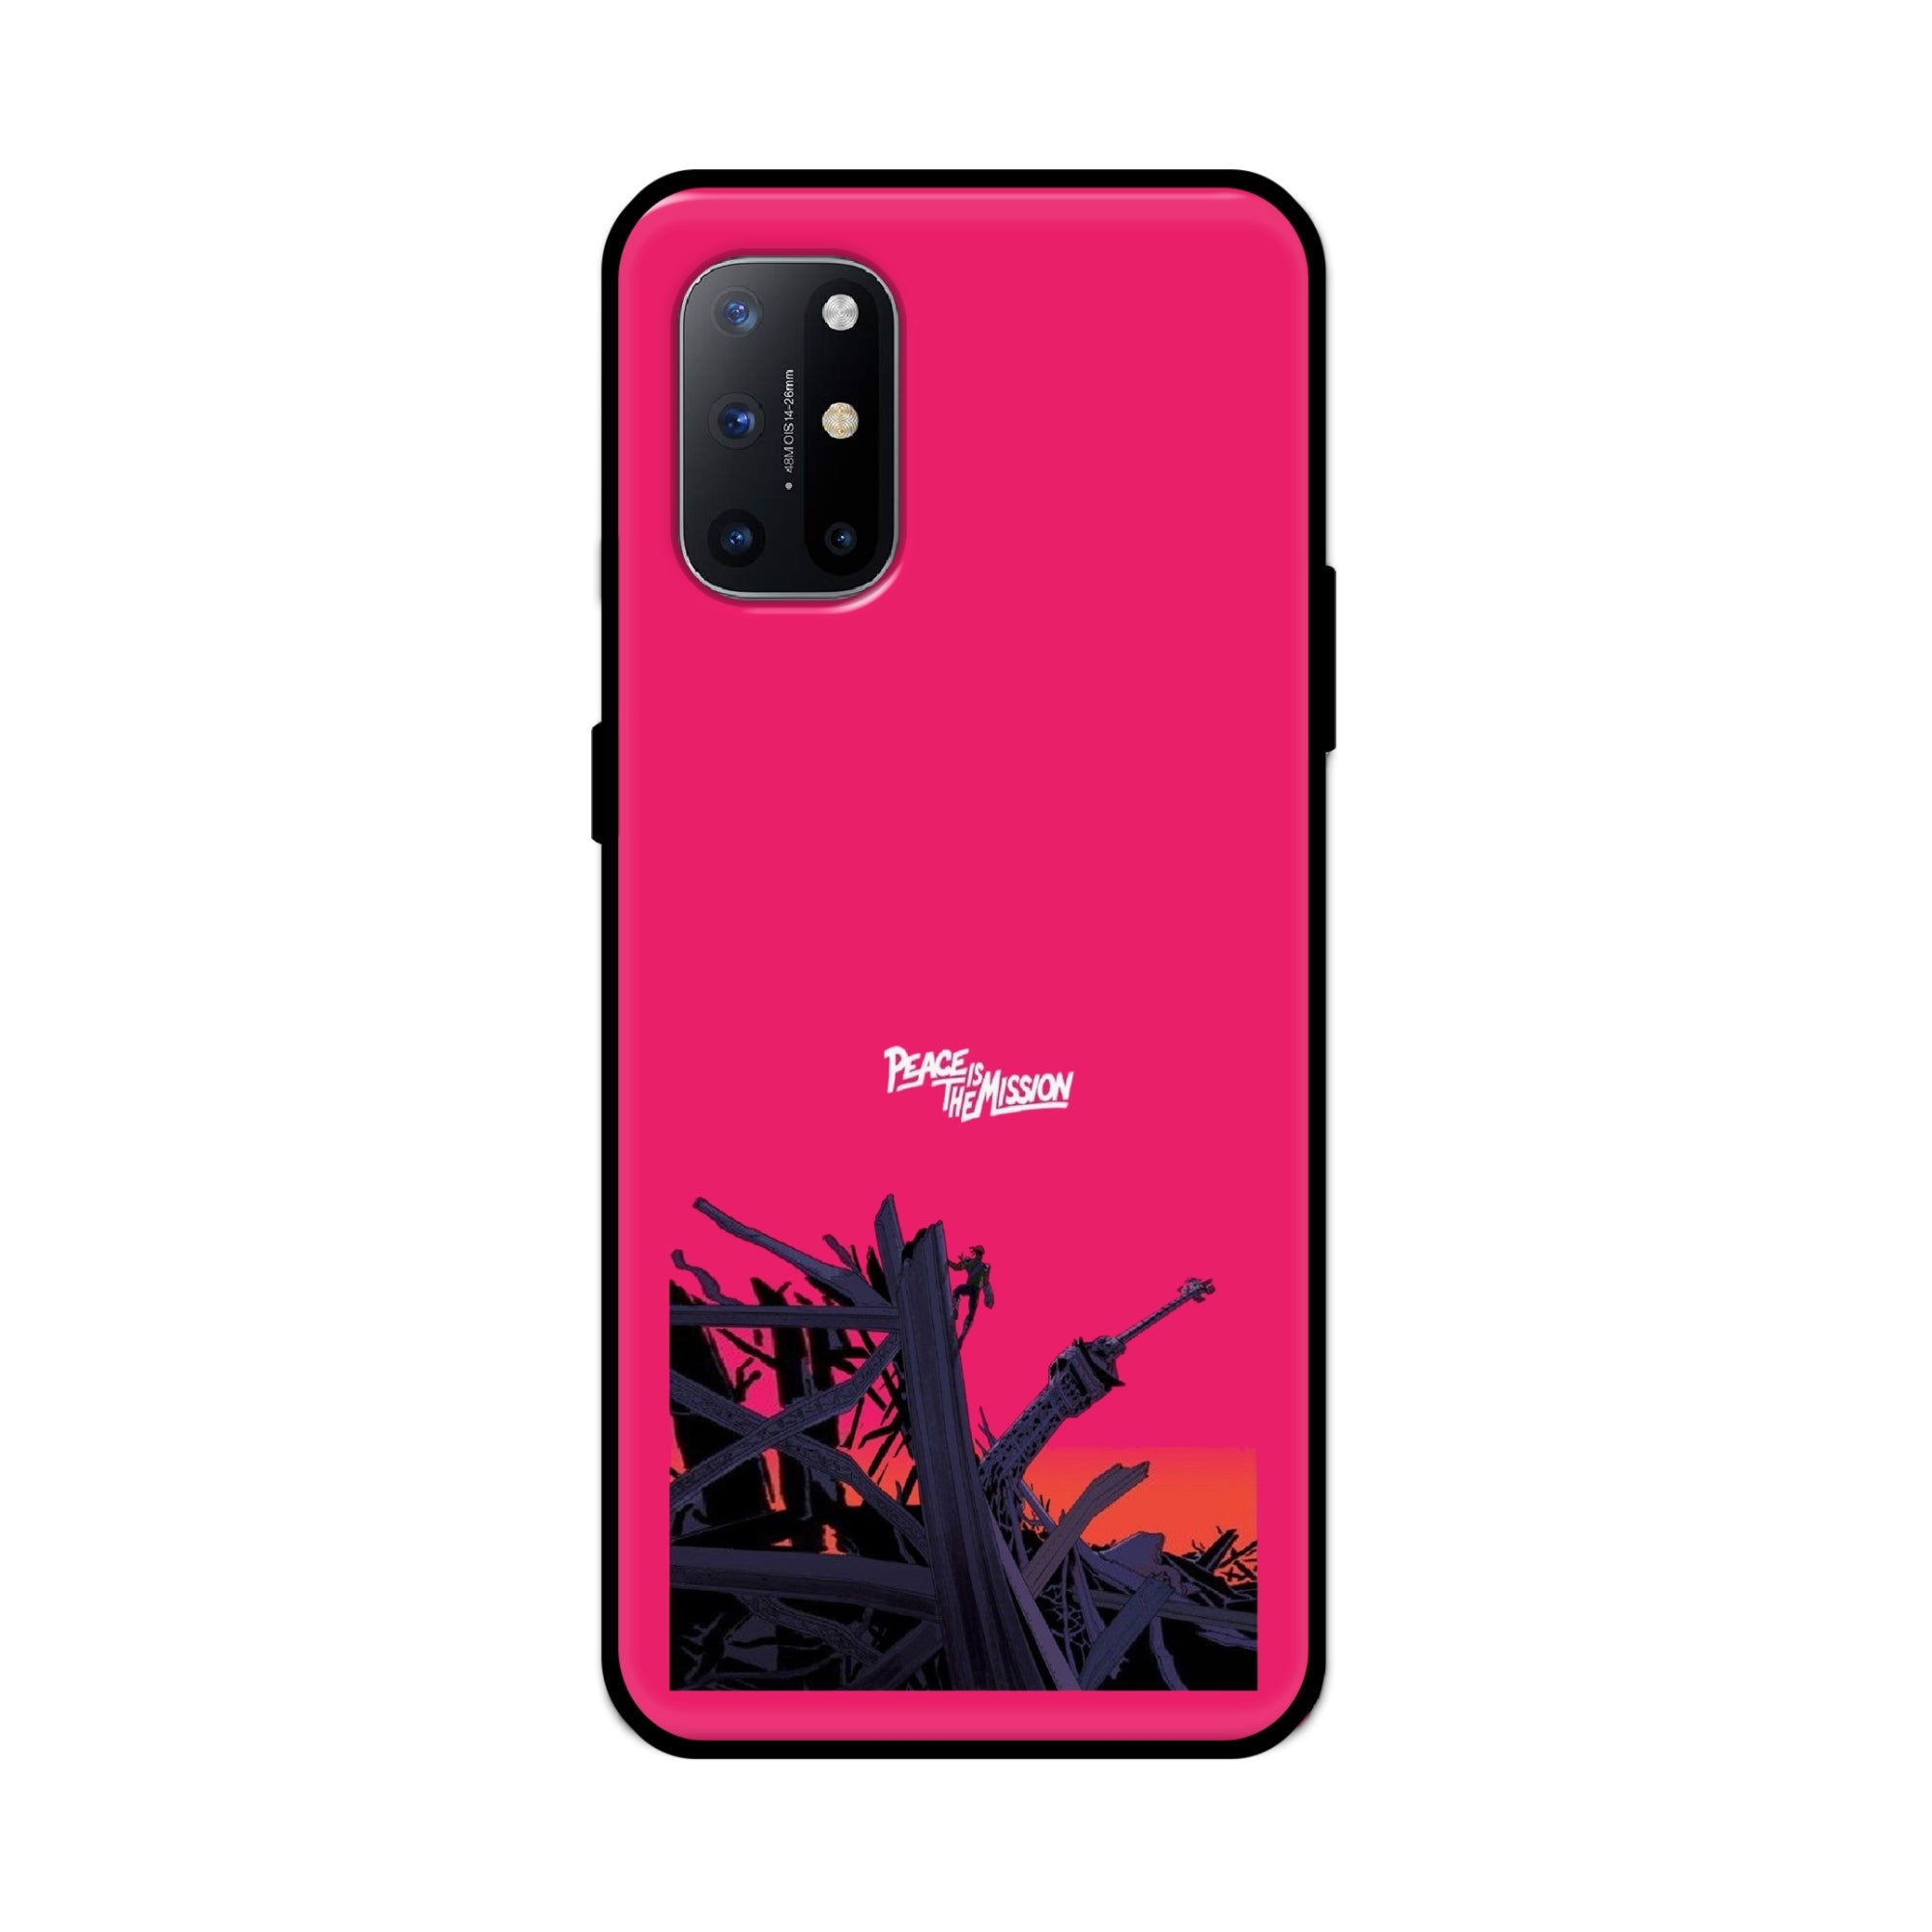 Buy Peace Is The Mission Metal-Silicon Back Mobile Phone Case/Cover For Oneplus 9R / 8T Online